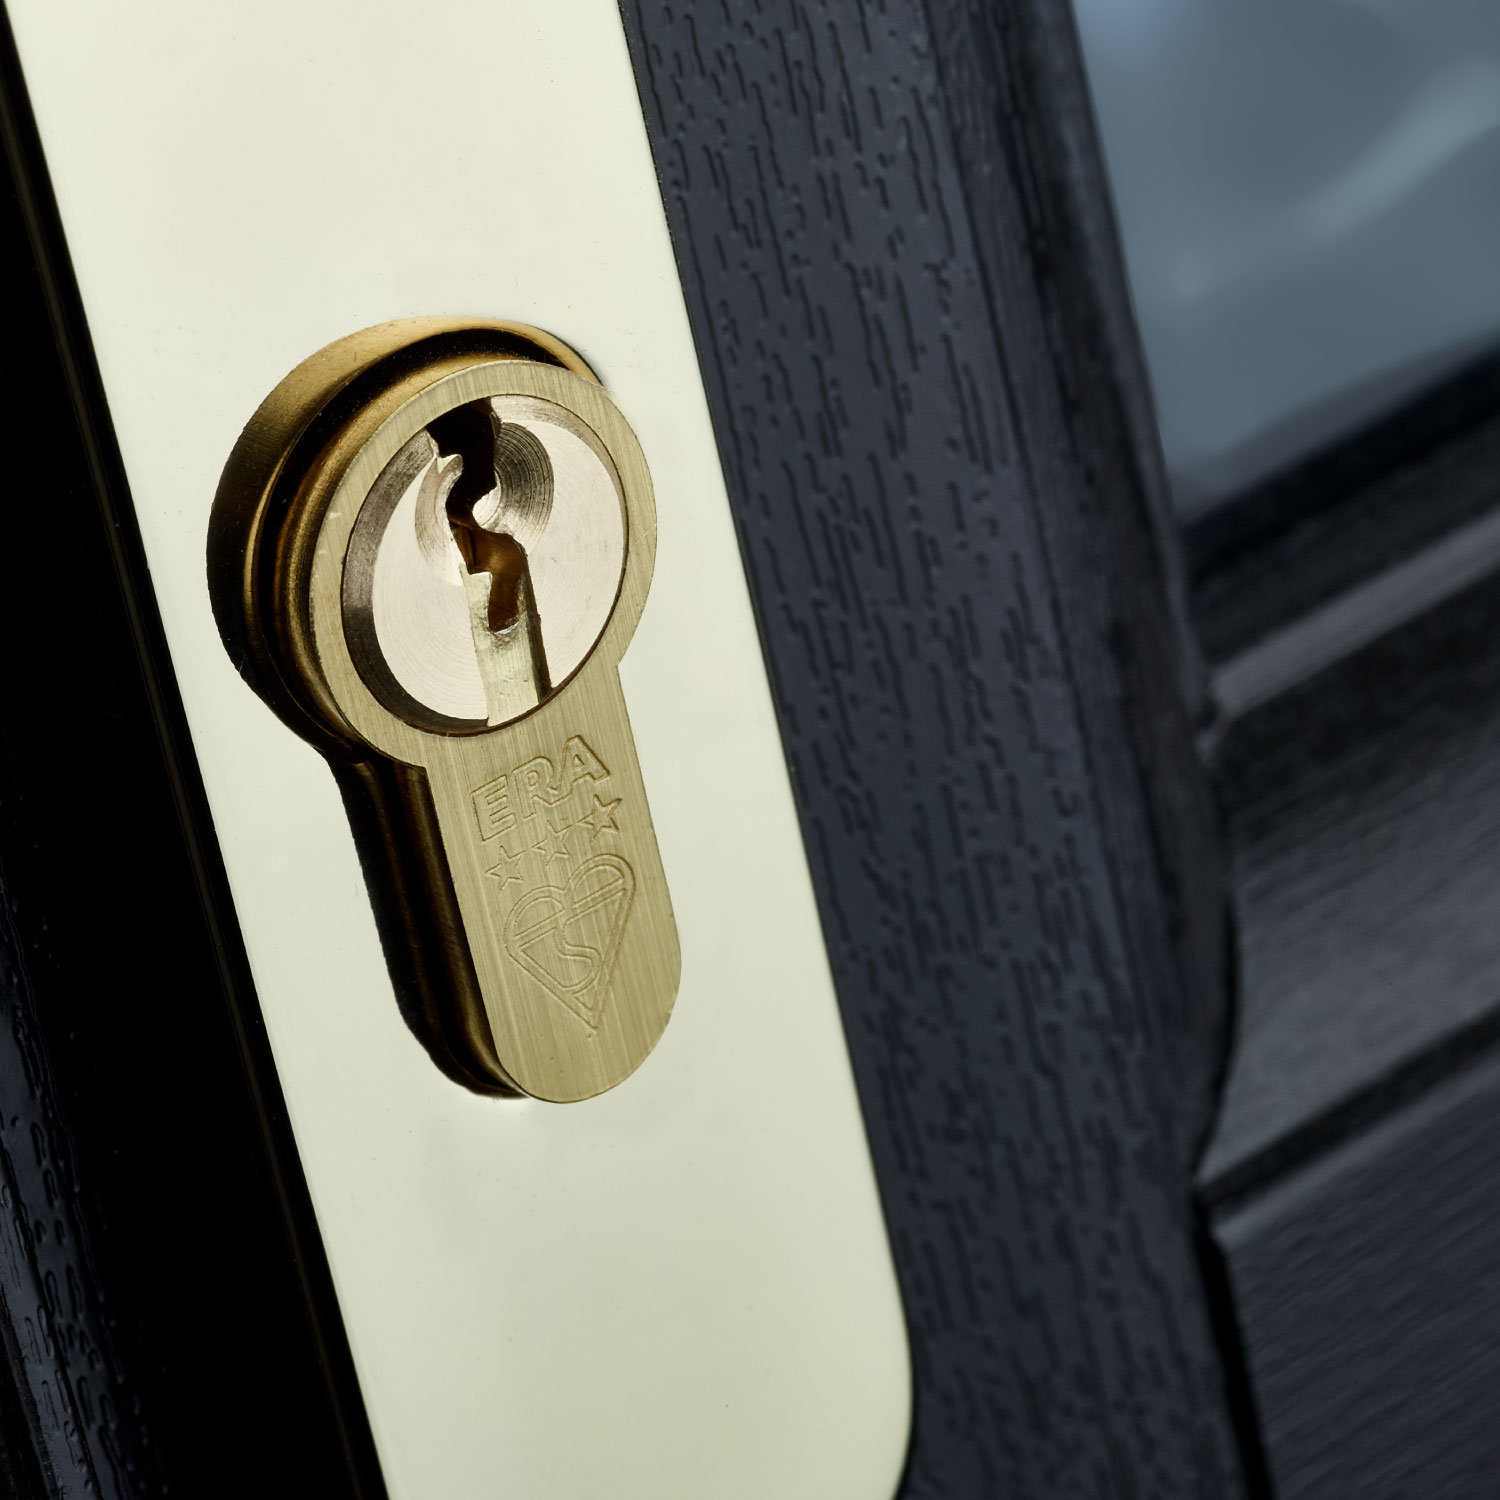 As consumer appetite for home automation continues to increase, Kerry Blackford, explores the cross-selling opportunities that smart security products present to locksmiths. 